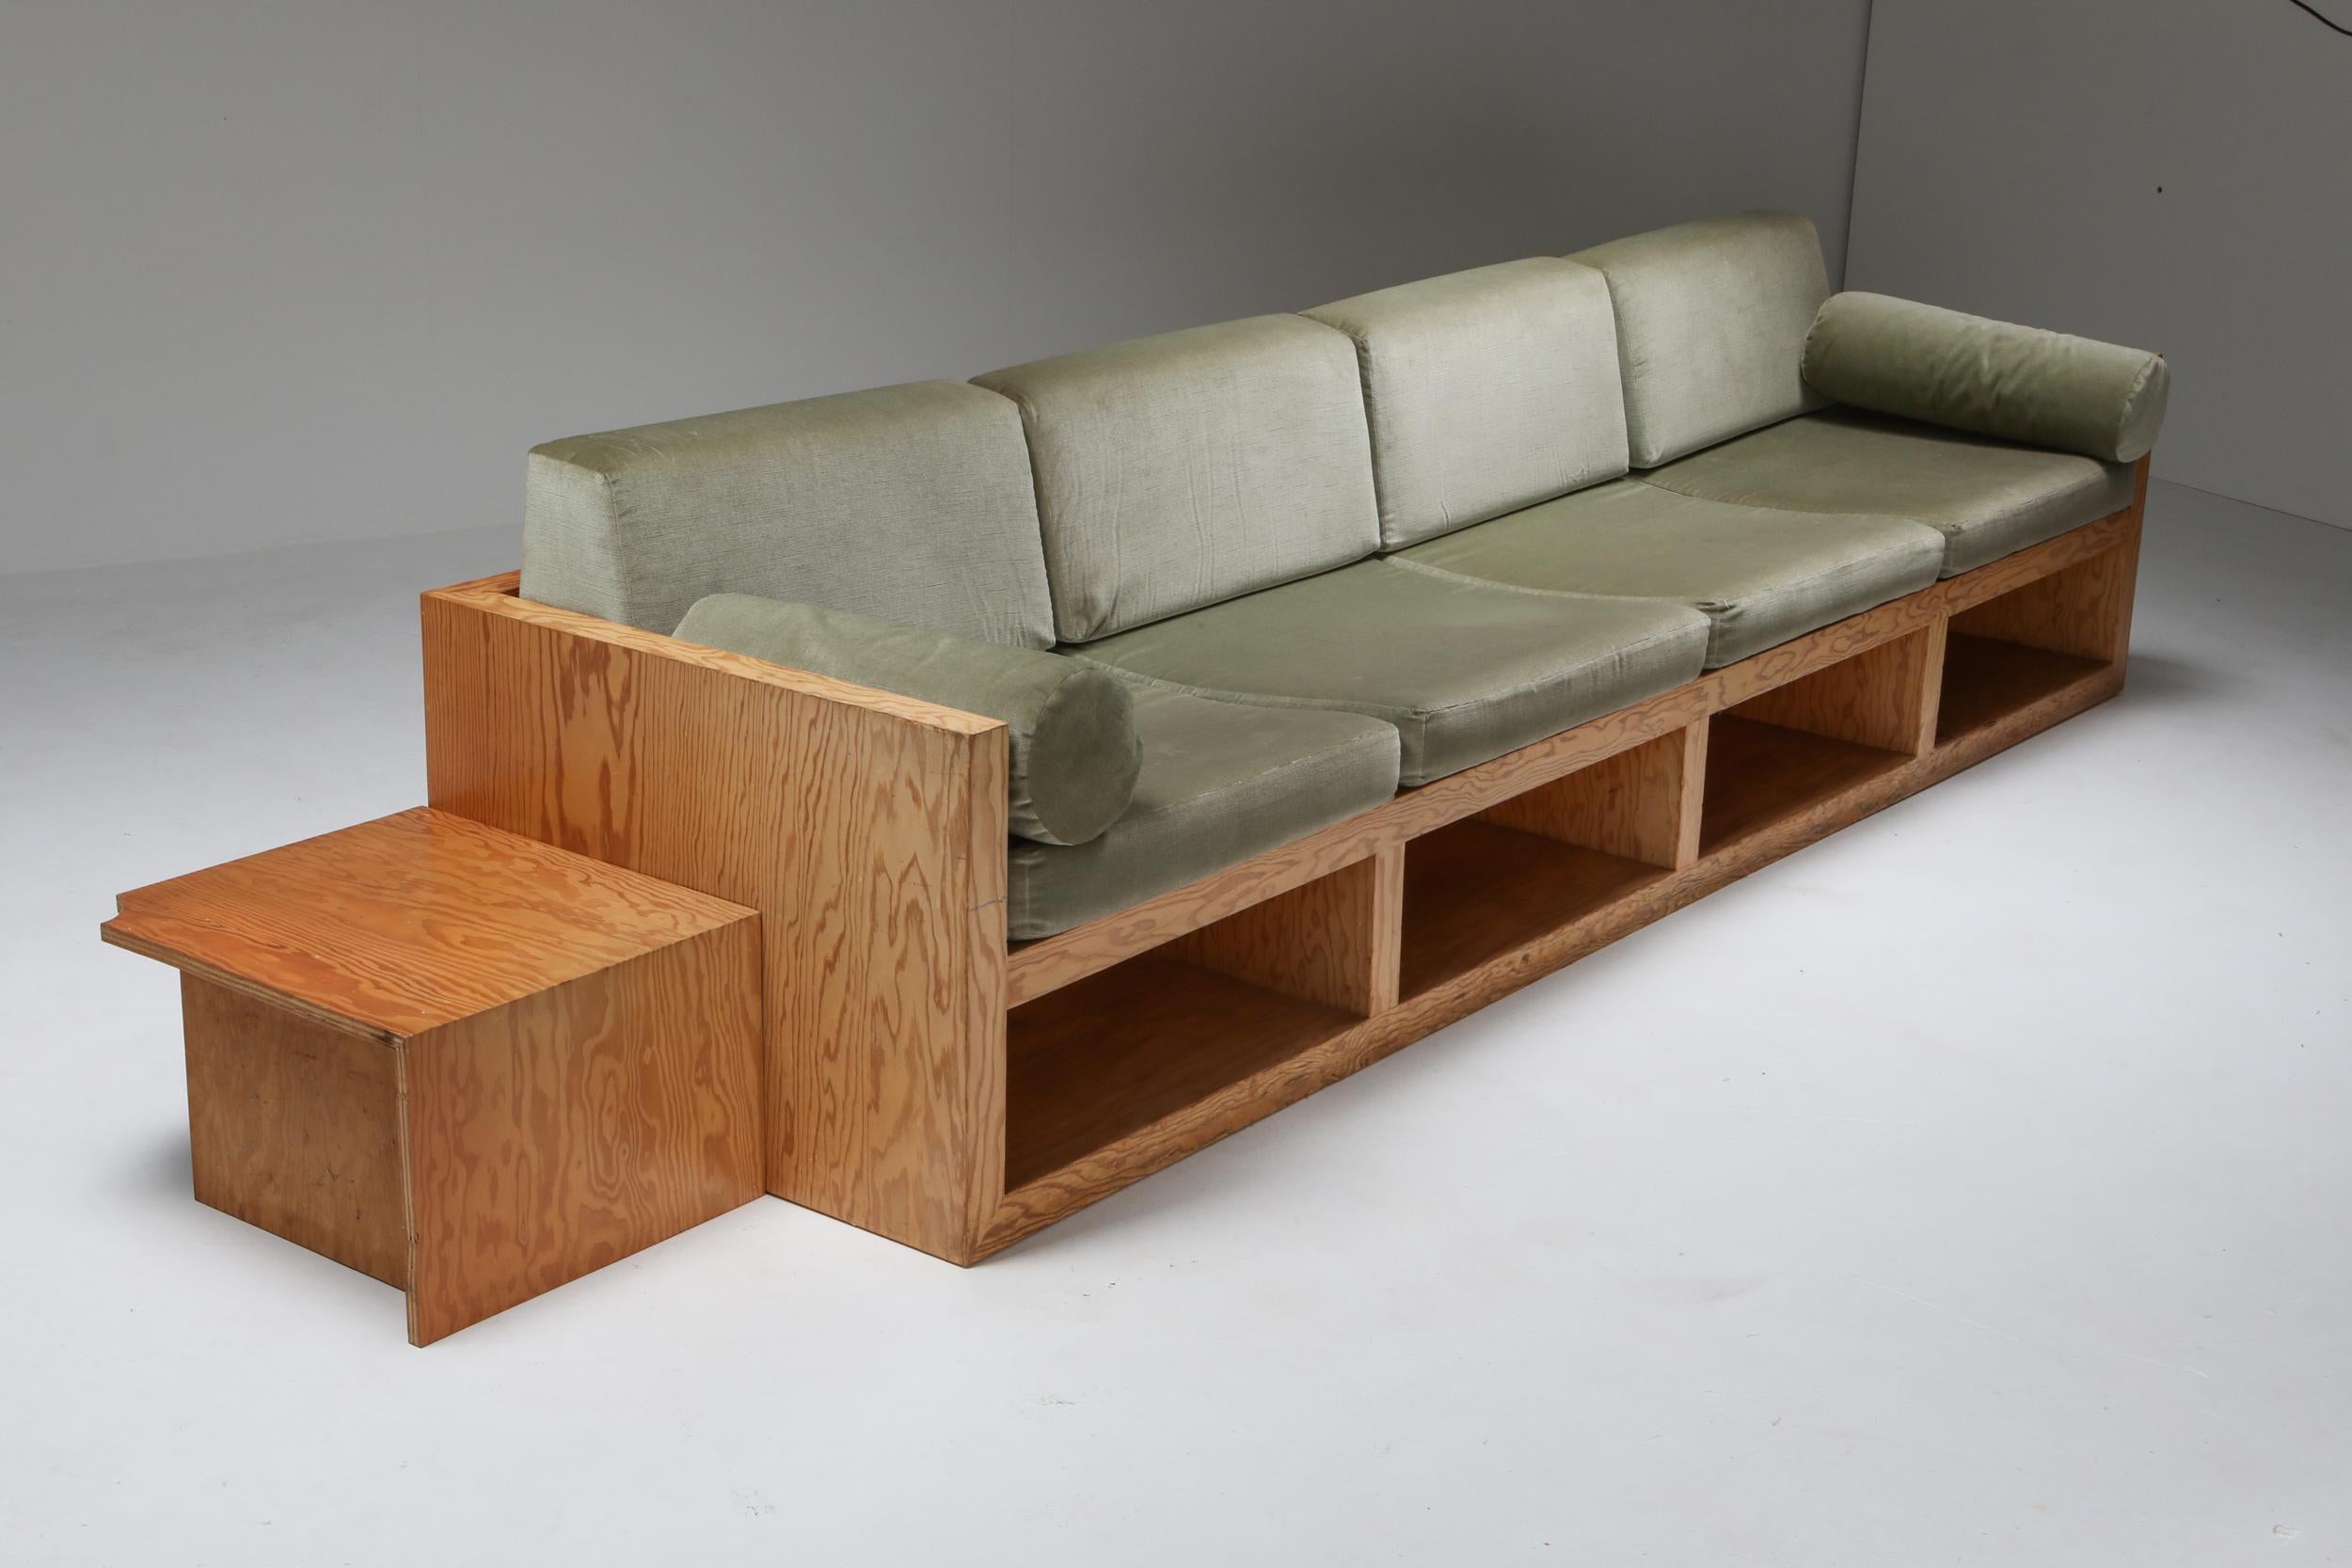 Custom designed couch by a Dutch architect from the 1960s
Minimalist and modernist design which incorporates great functionality.
The small side table is included in this listing.
This piece is part of a larger living room set of which all pieces